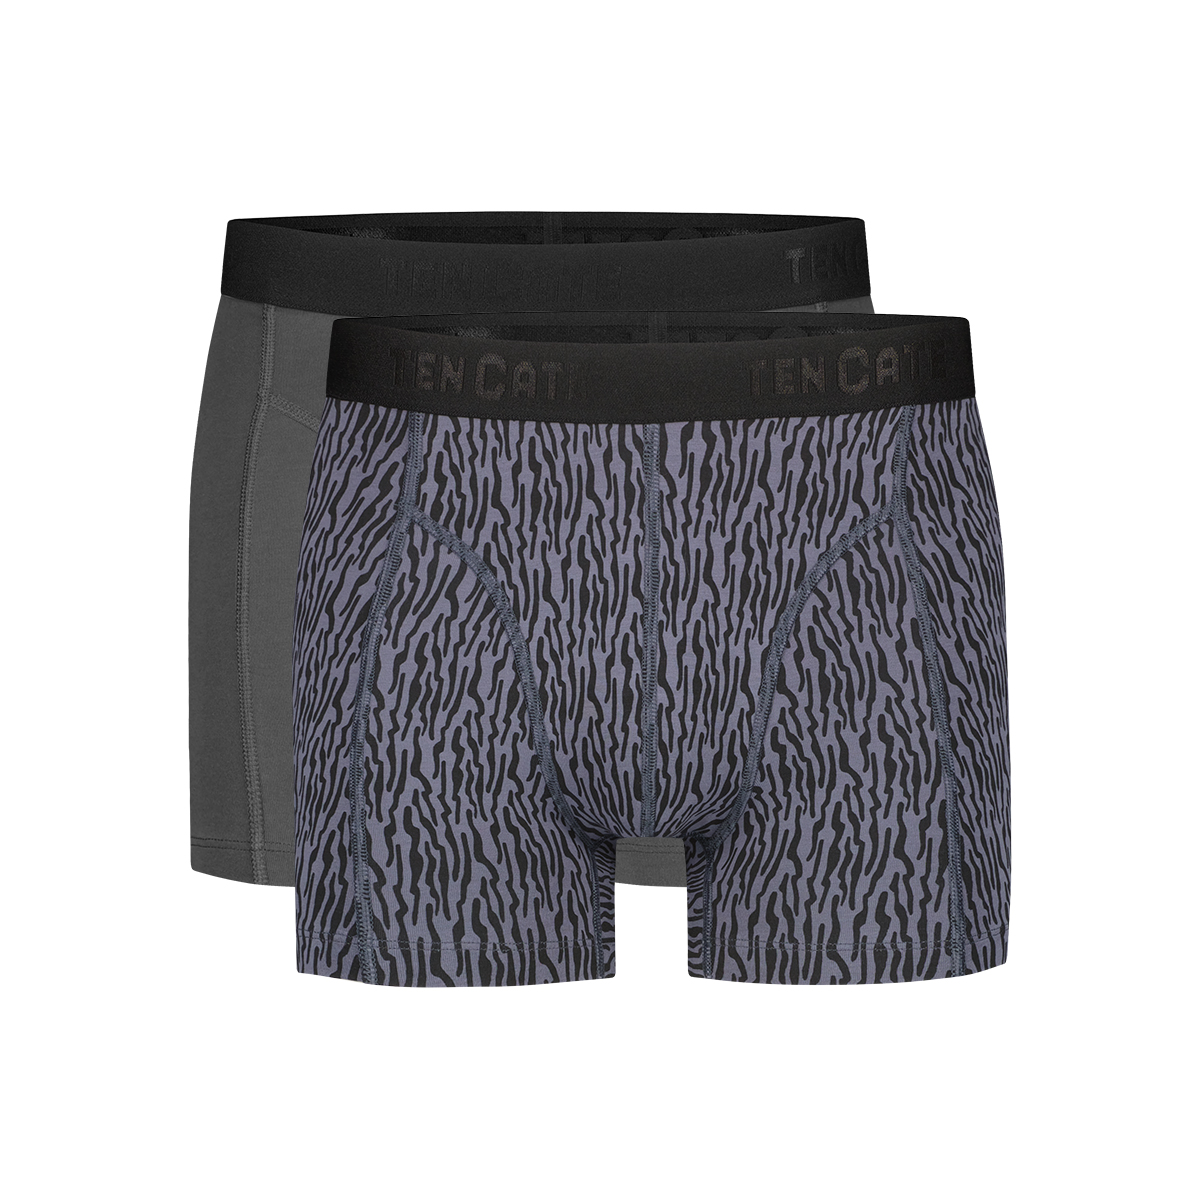 shorts cool lines grey 2 pack